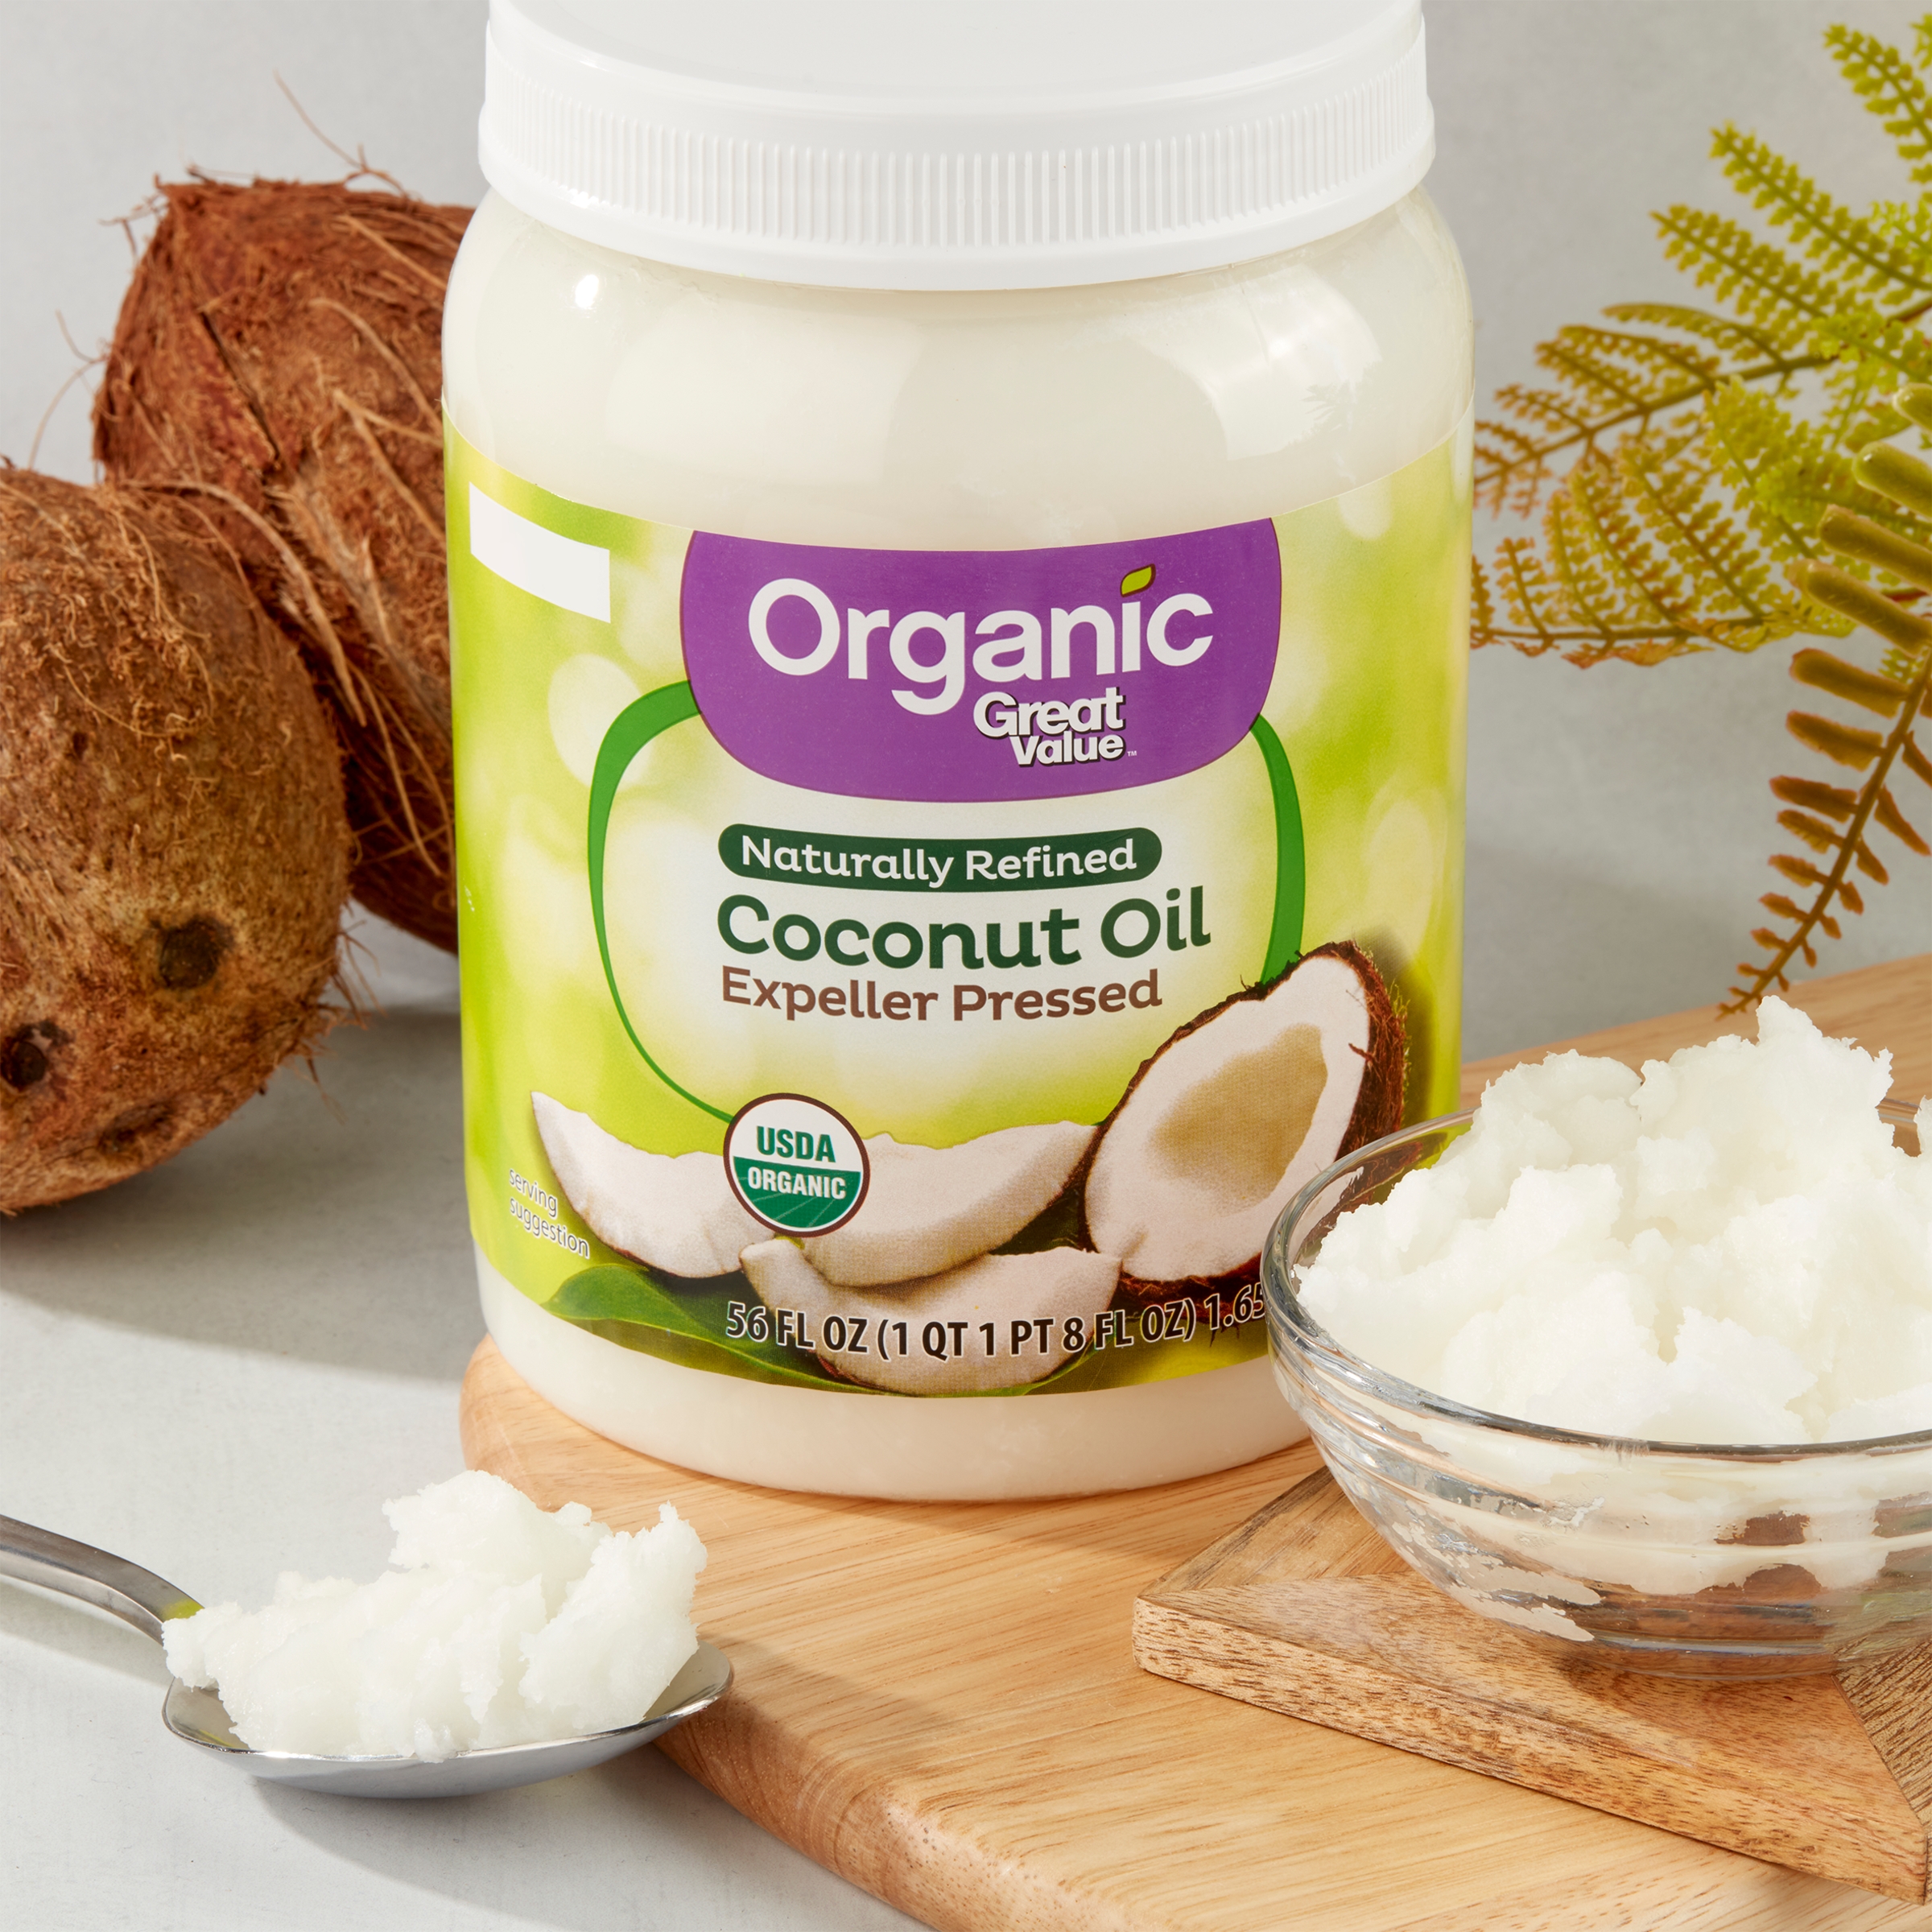 Great Value Organic Naturally Refined Coconut Oil, 56 fl oz - image 2 of 7